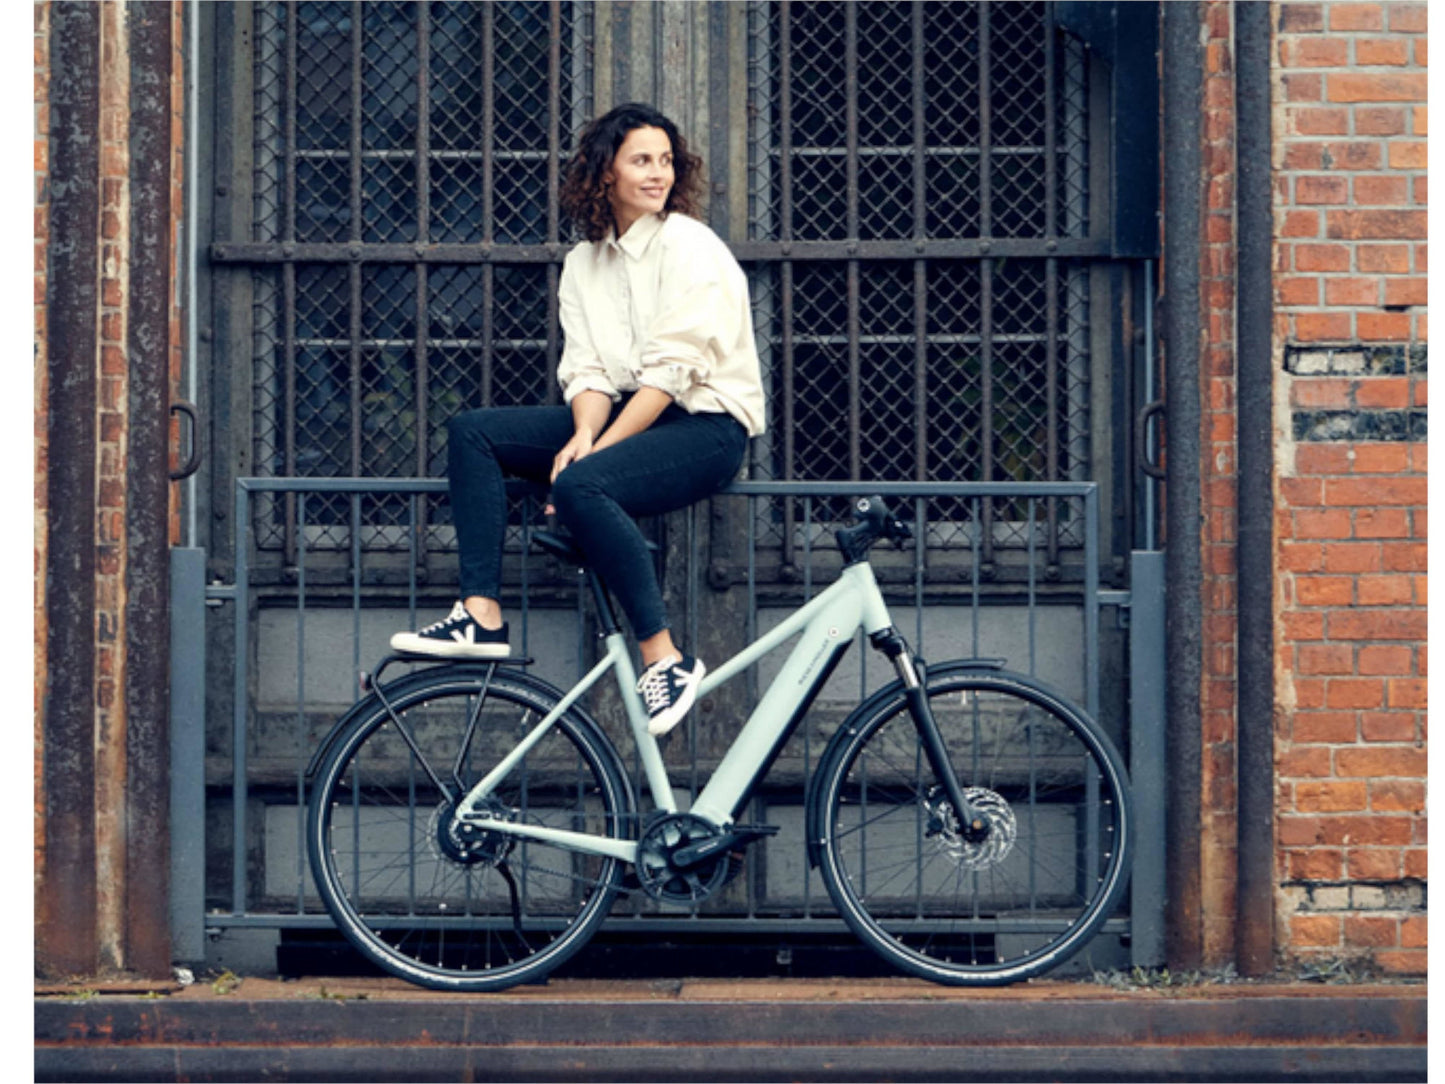 Riese and Muller Roadster Mixte Vario eMTB woman sitting with bike in city